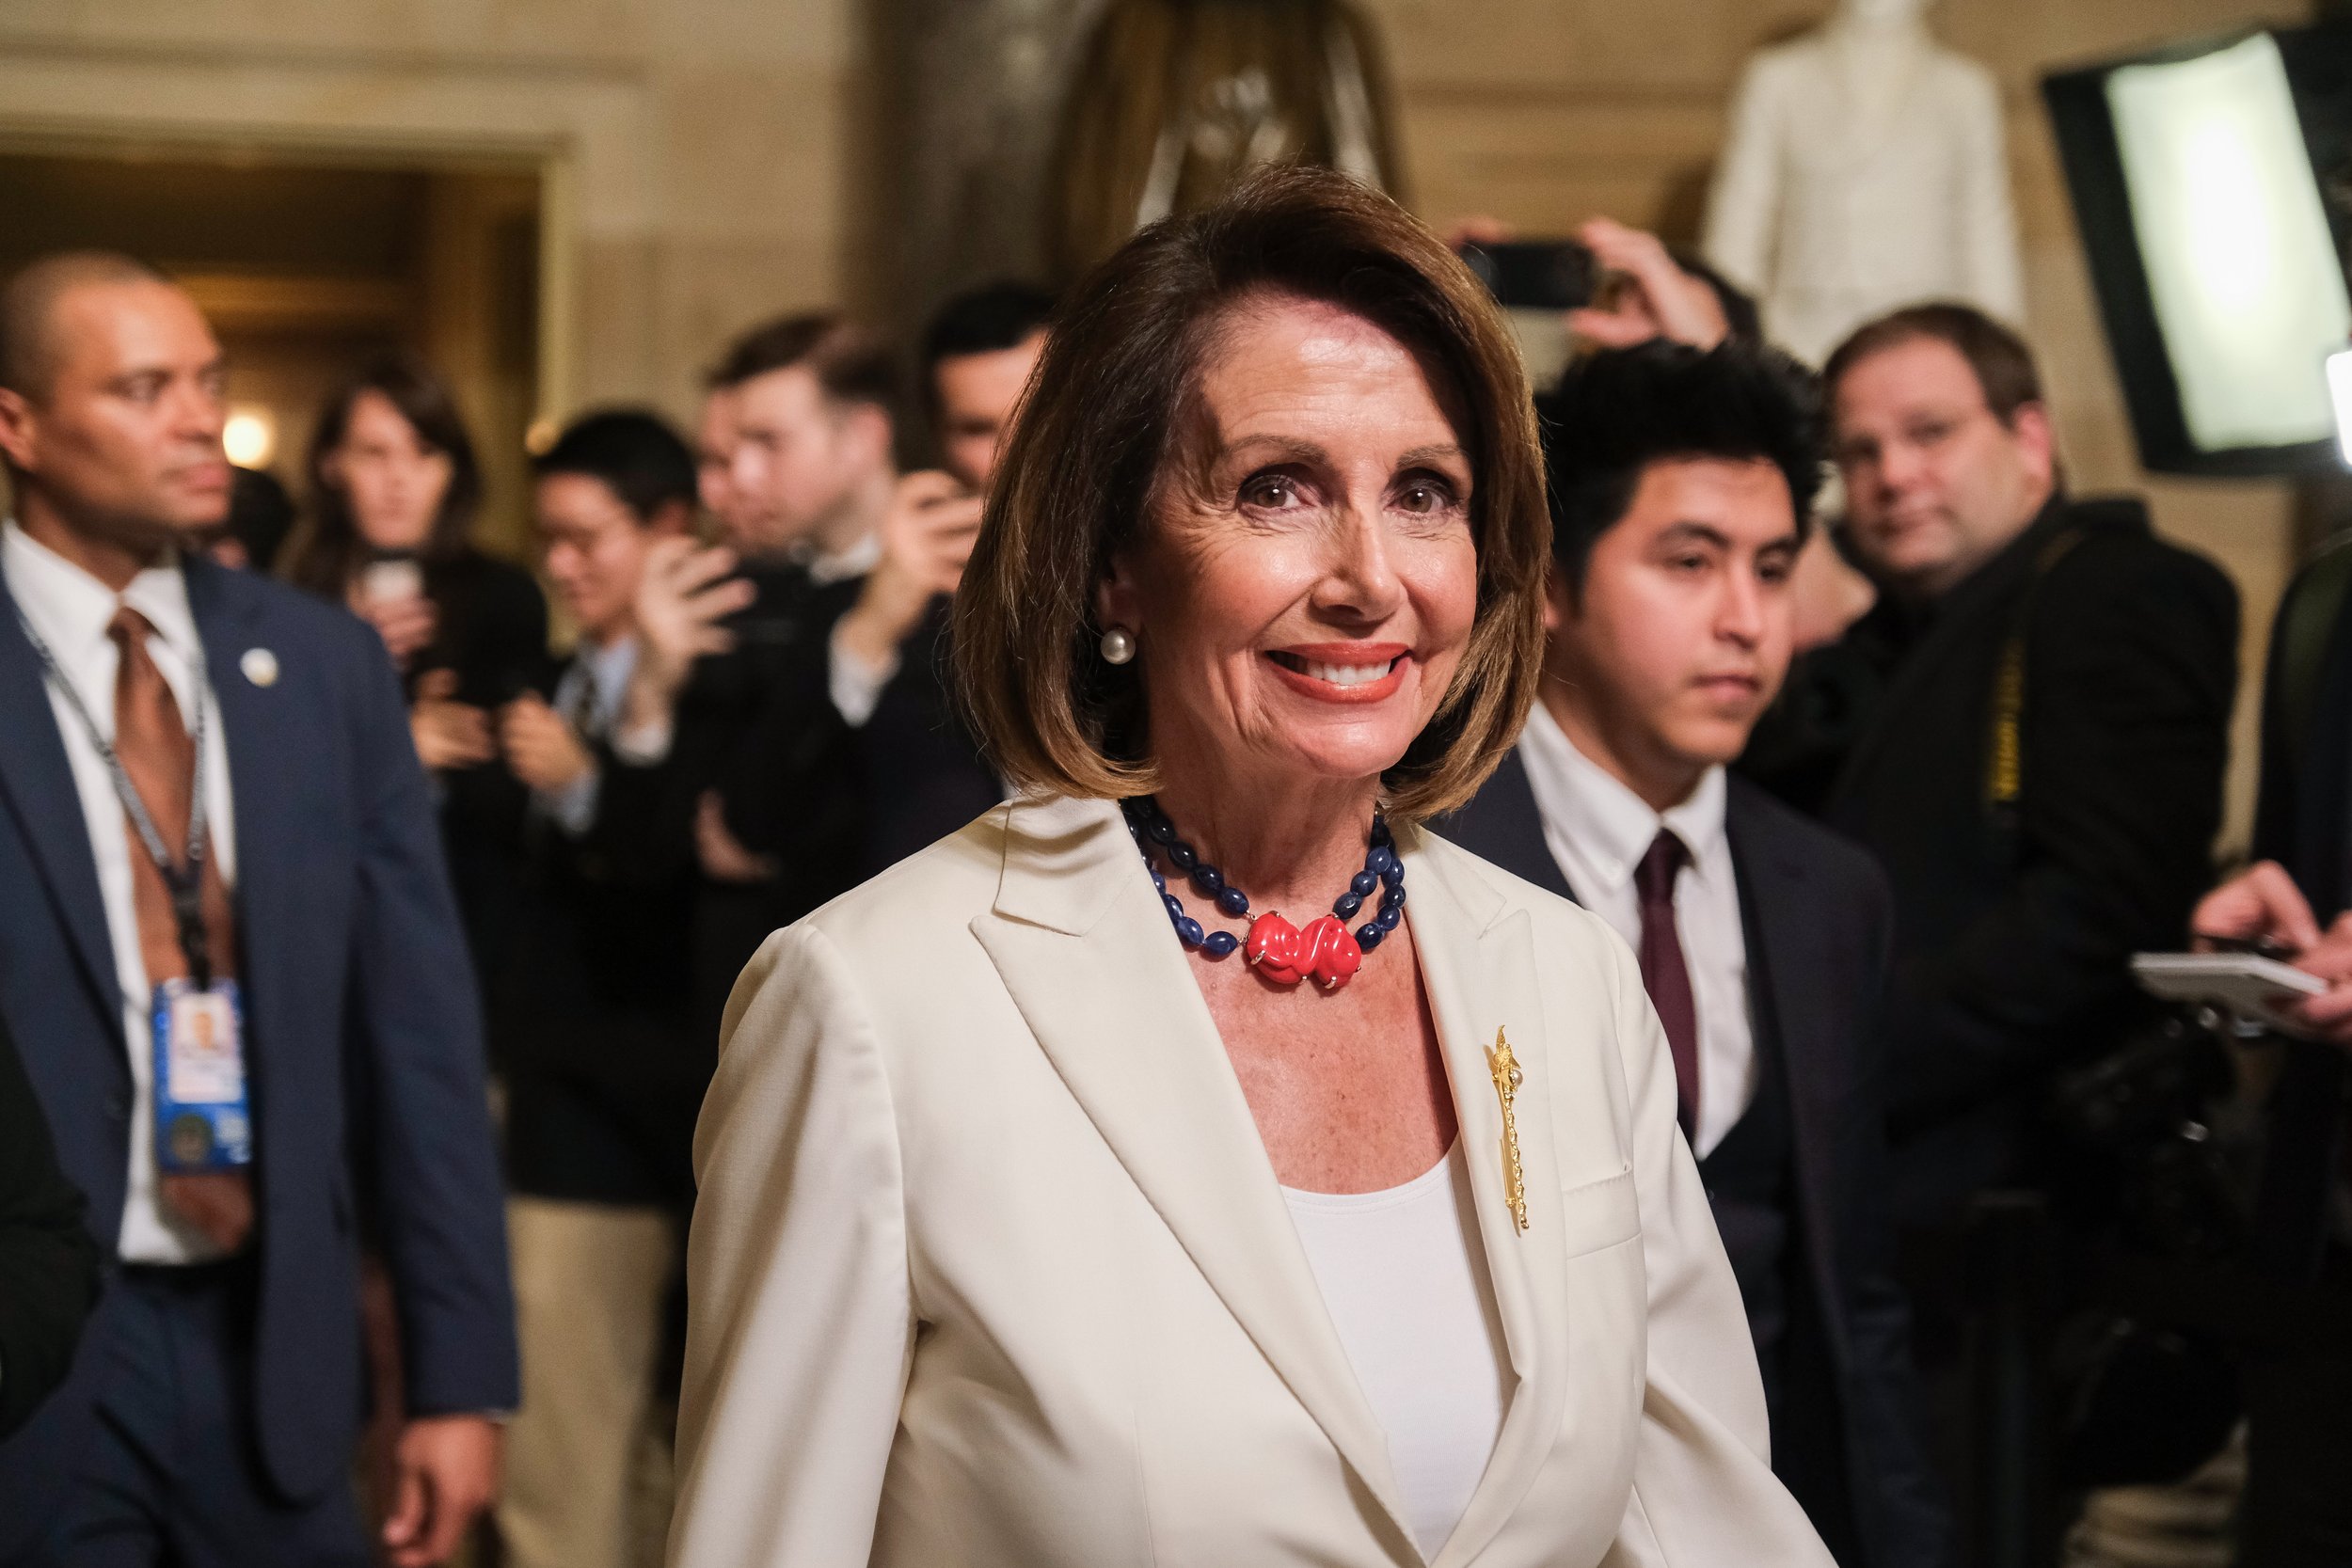  Rep. Nancy Pelosi (D-CA) walks through Statuary Hall to attend the State of the Union address.    February 2019   